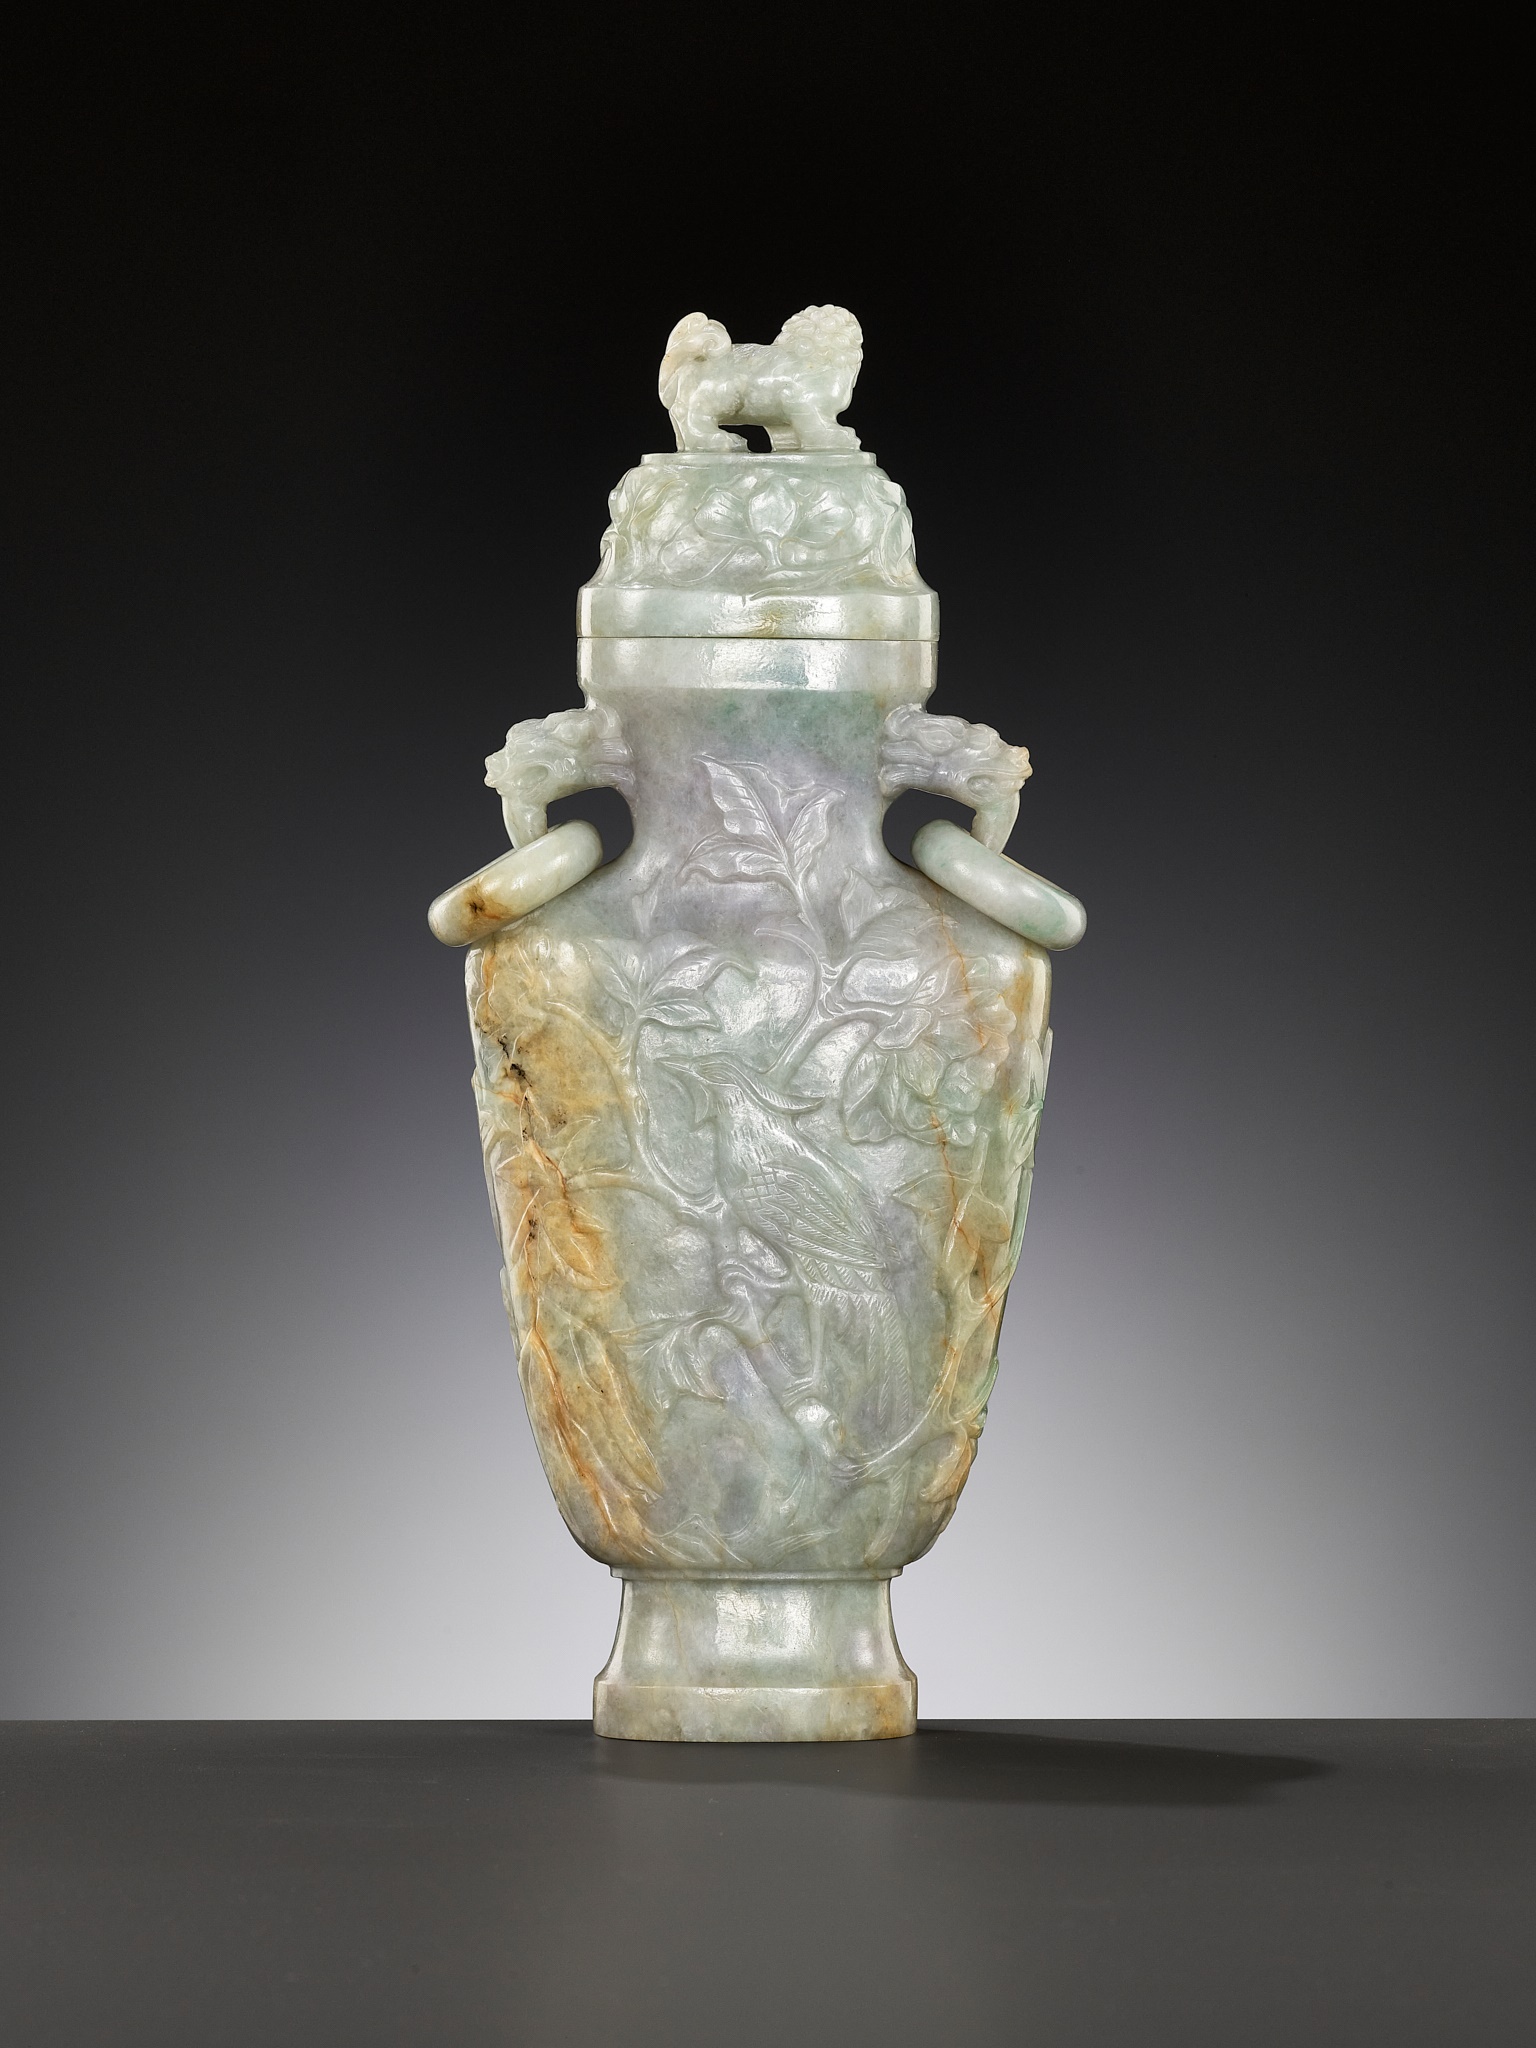 A JADEITE BALUSTER VASE AND COVER, LATE QING DYNASTY TO REPUBLIC PERIOD - Image 6 of 12